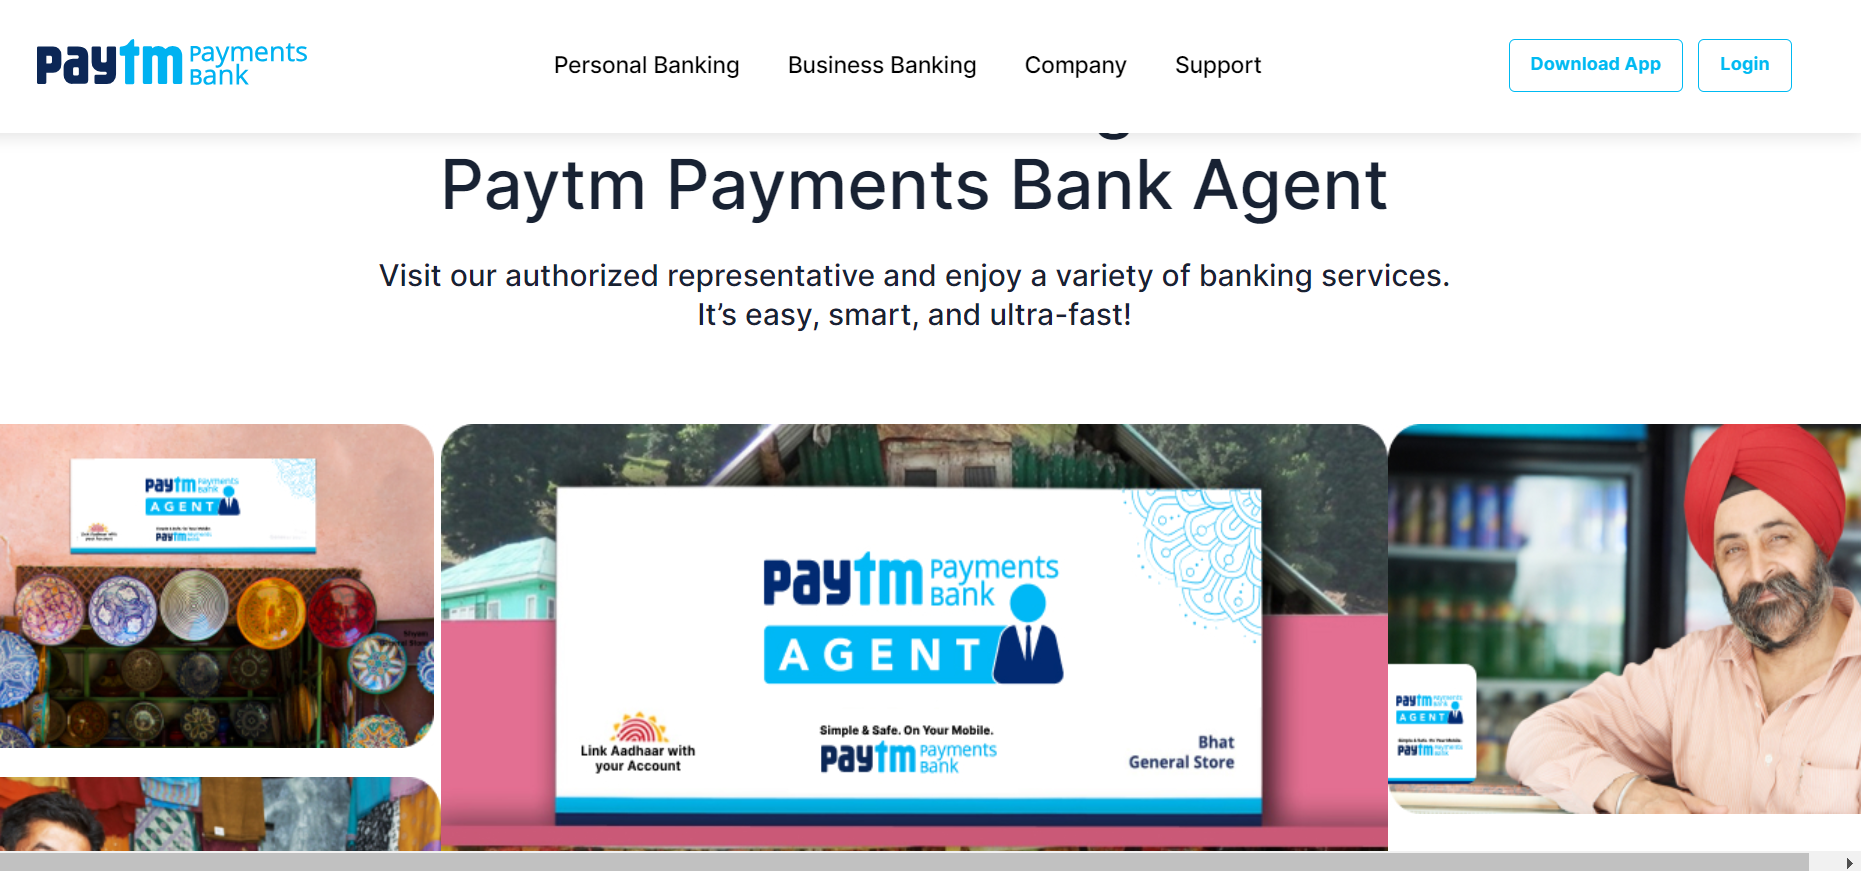 How to become a Paytm agent